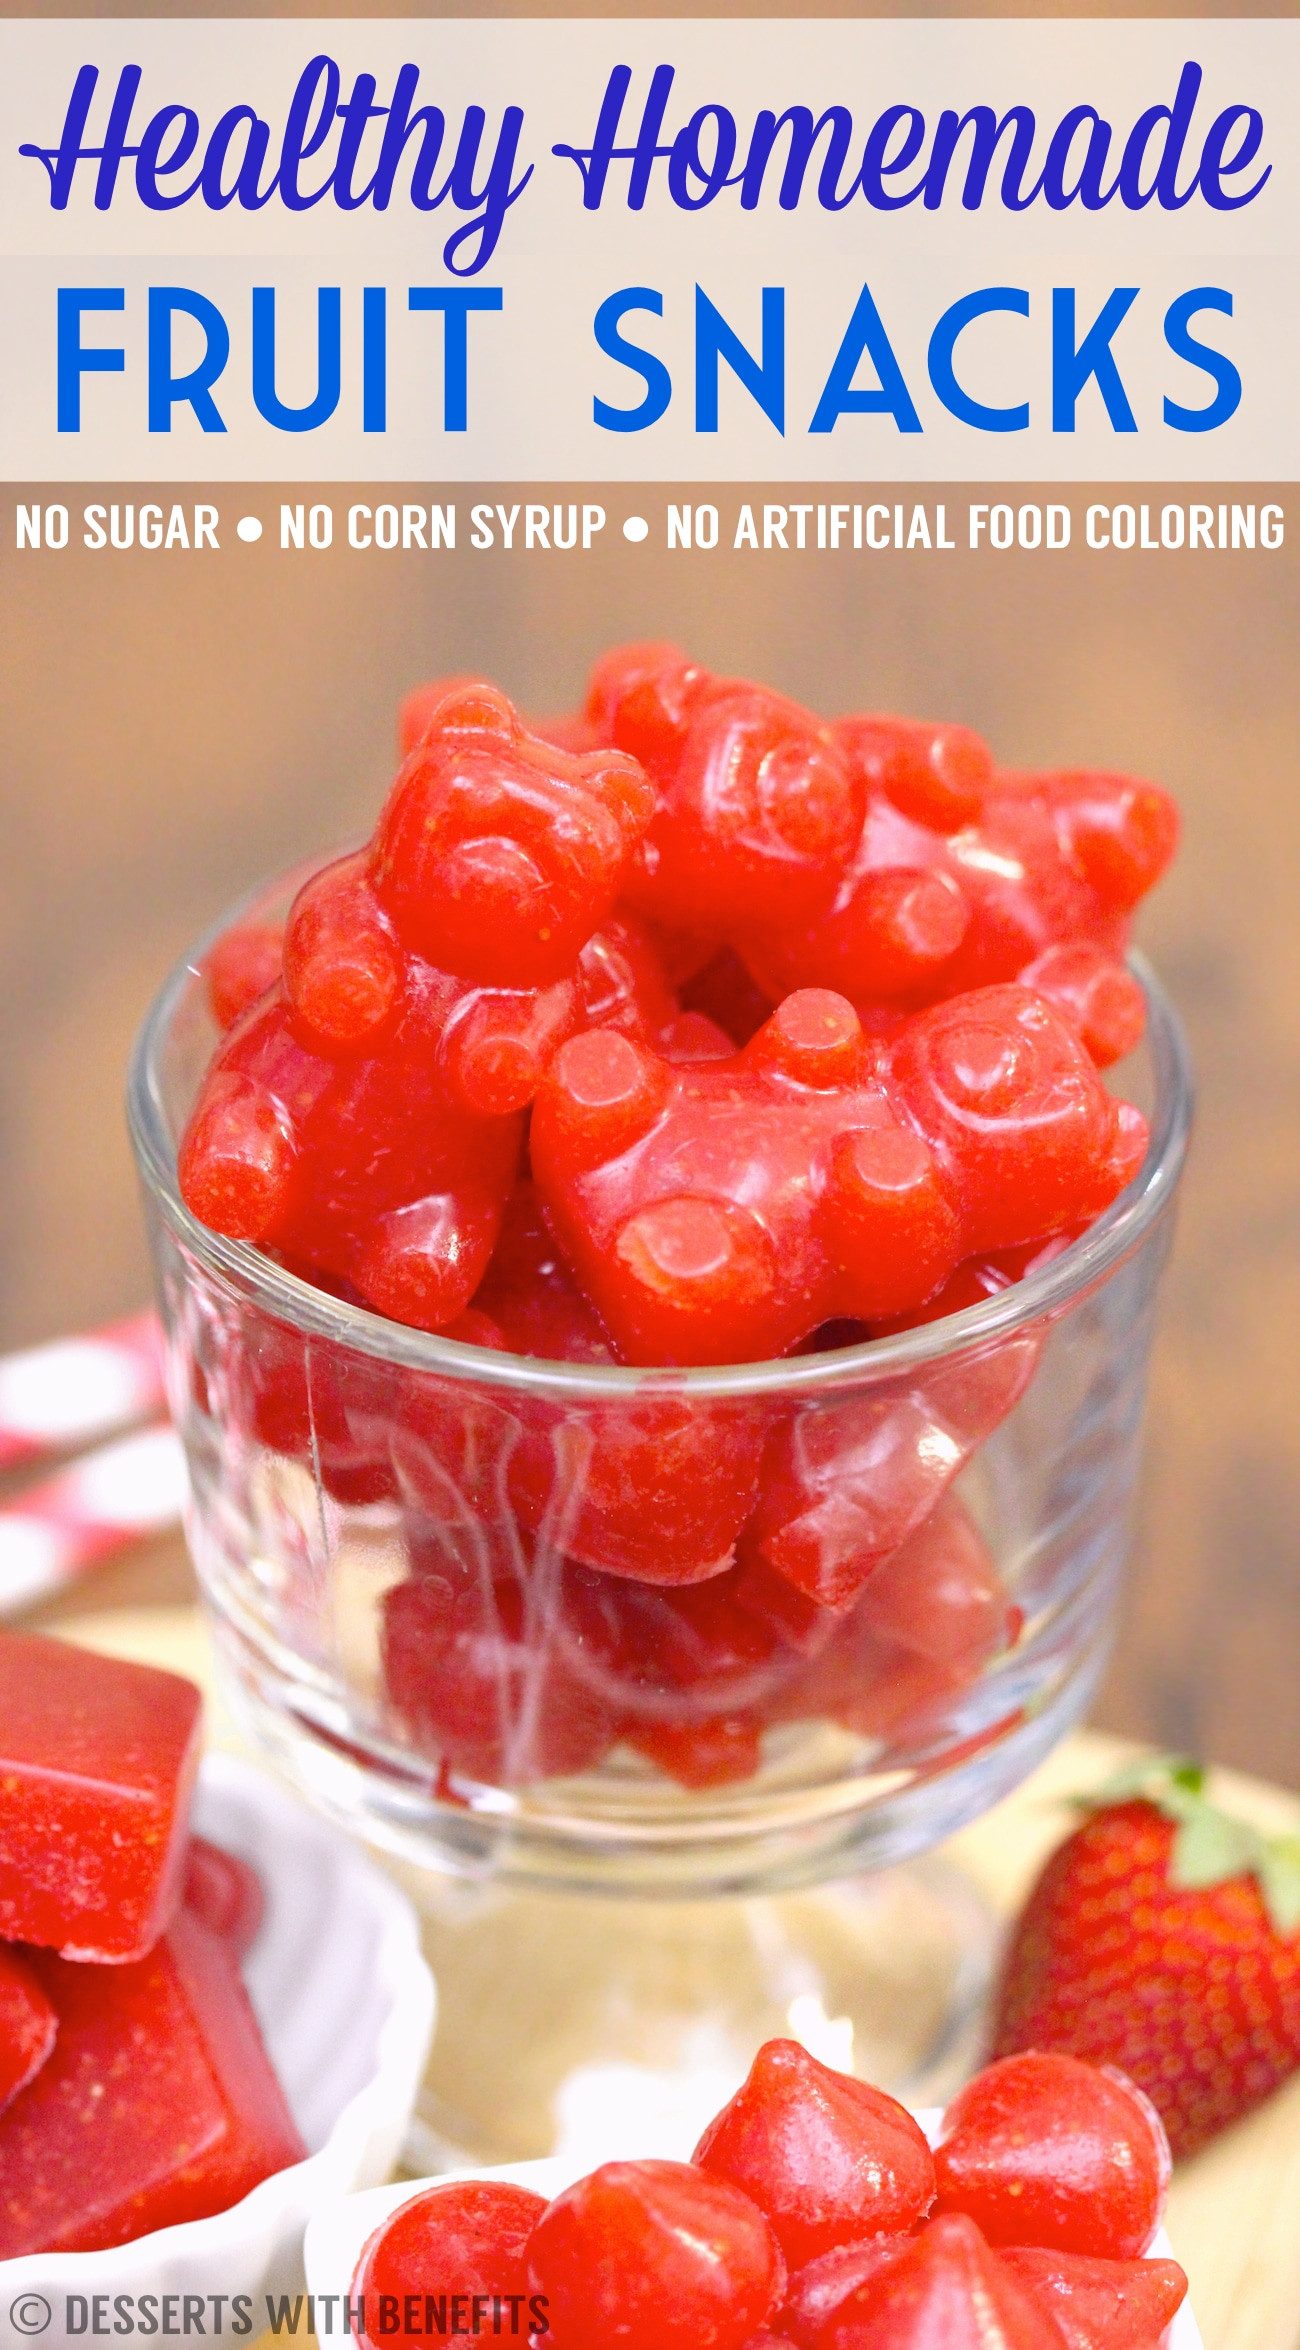 Healthy Gummy Fruit Snacks
 Healthy Homemade Fruit Snacks Desserts with Benefits